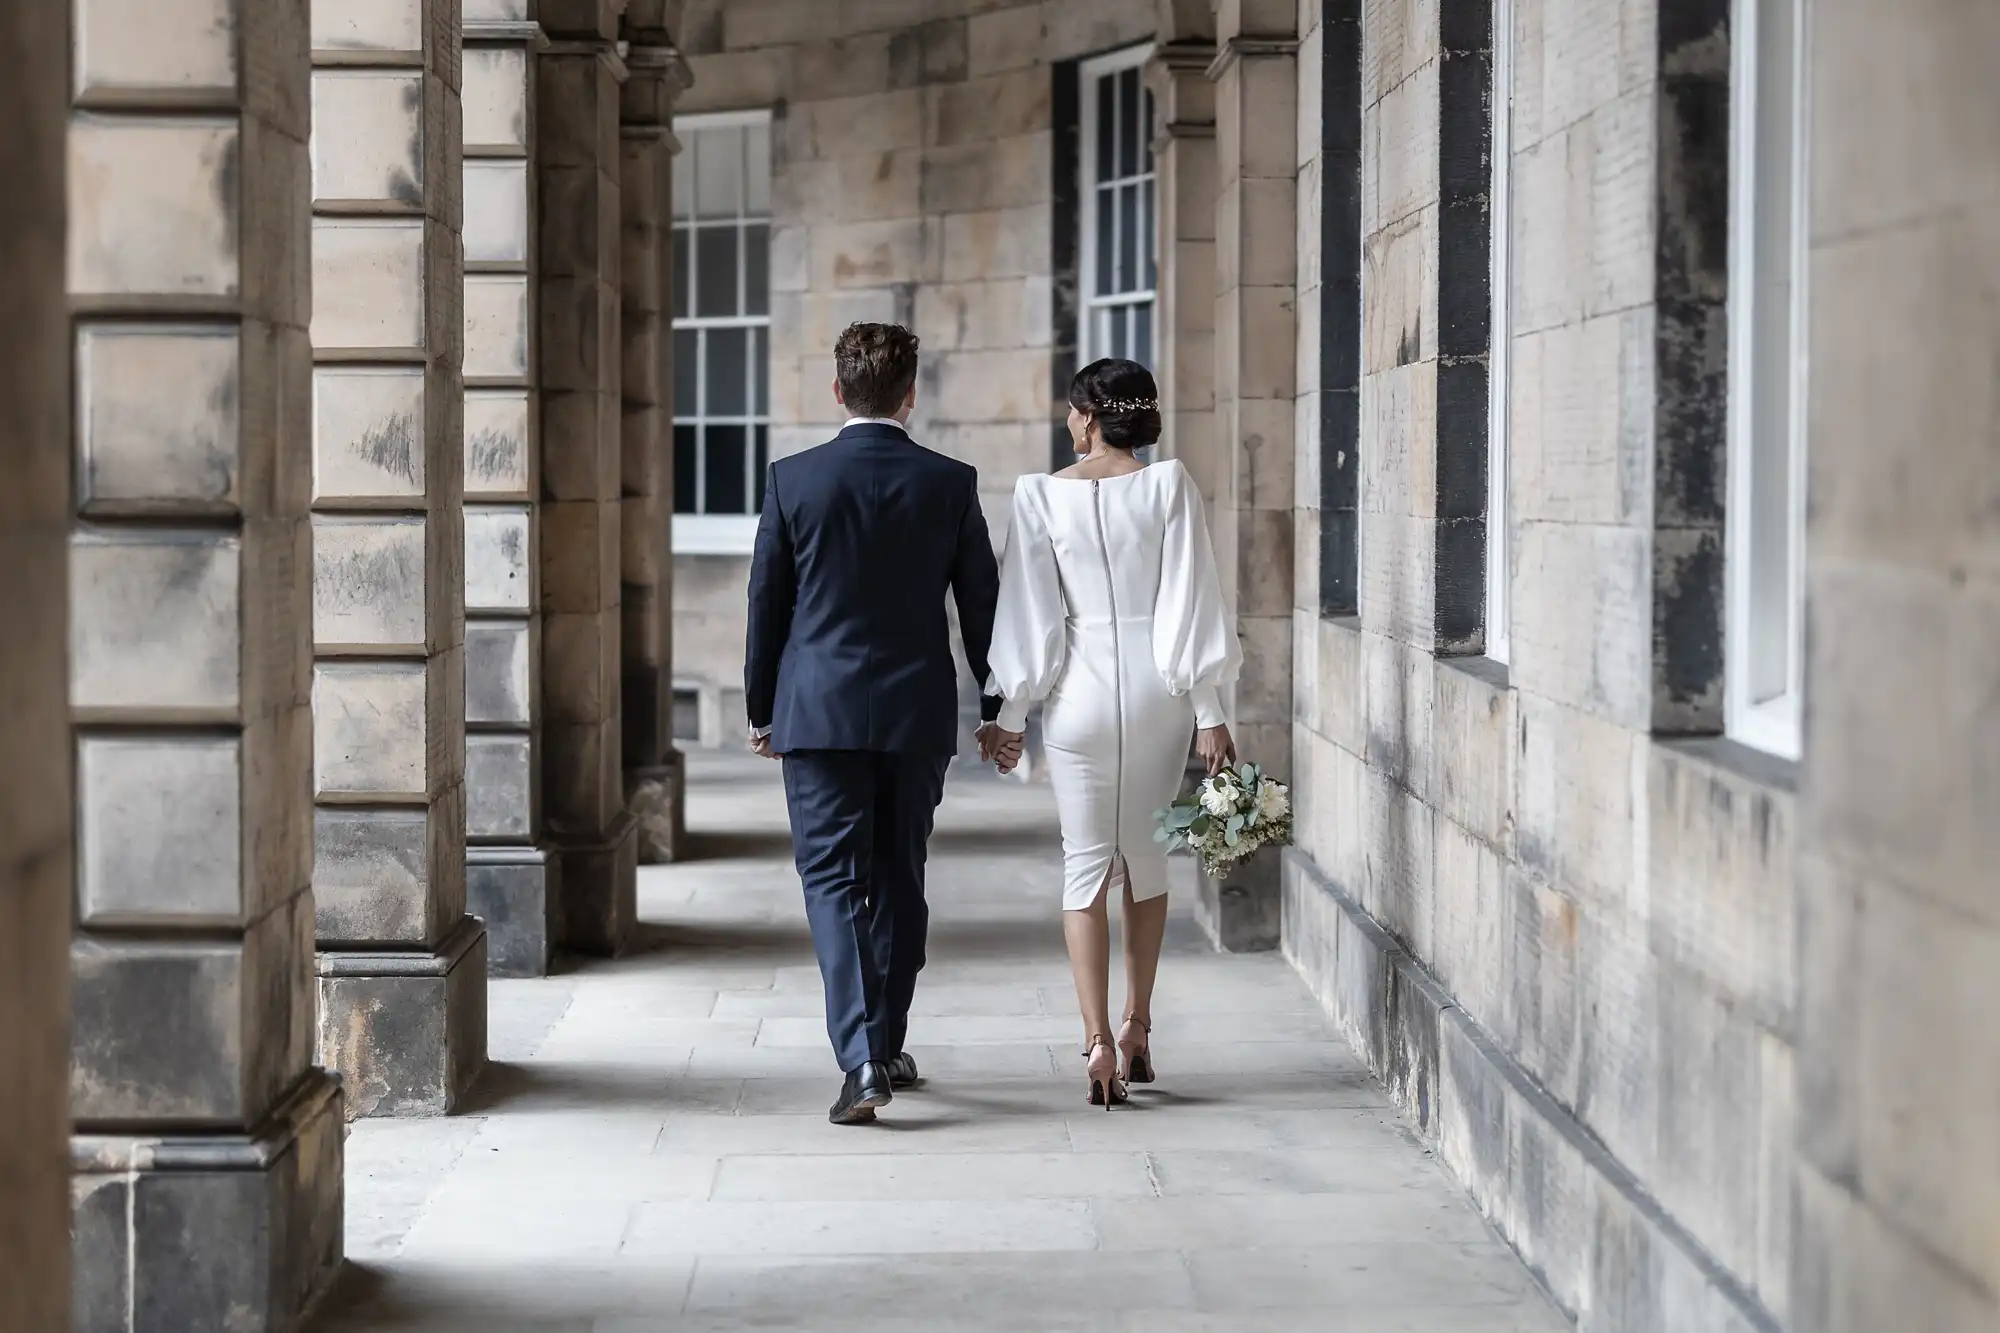 A newlywed couple walks hand in hand along a stone-columned corridor, the woman in a white dress carrying a bouquet and the man in a navy suit.